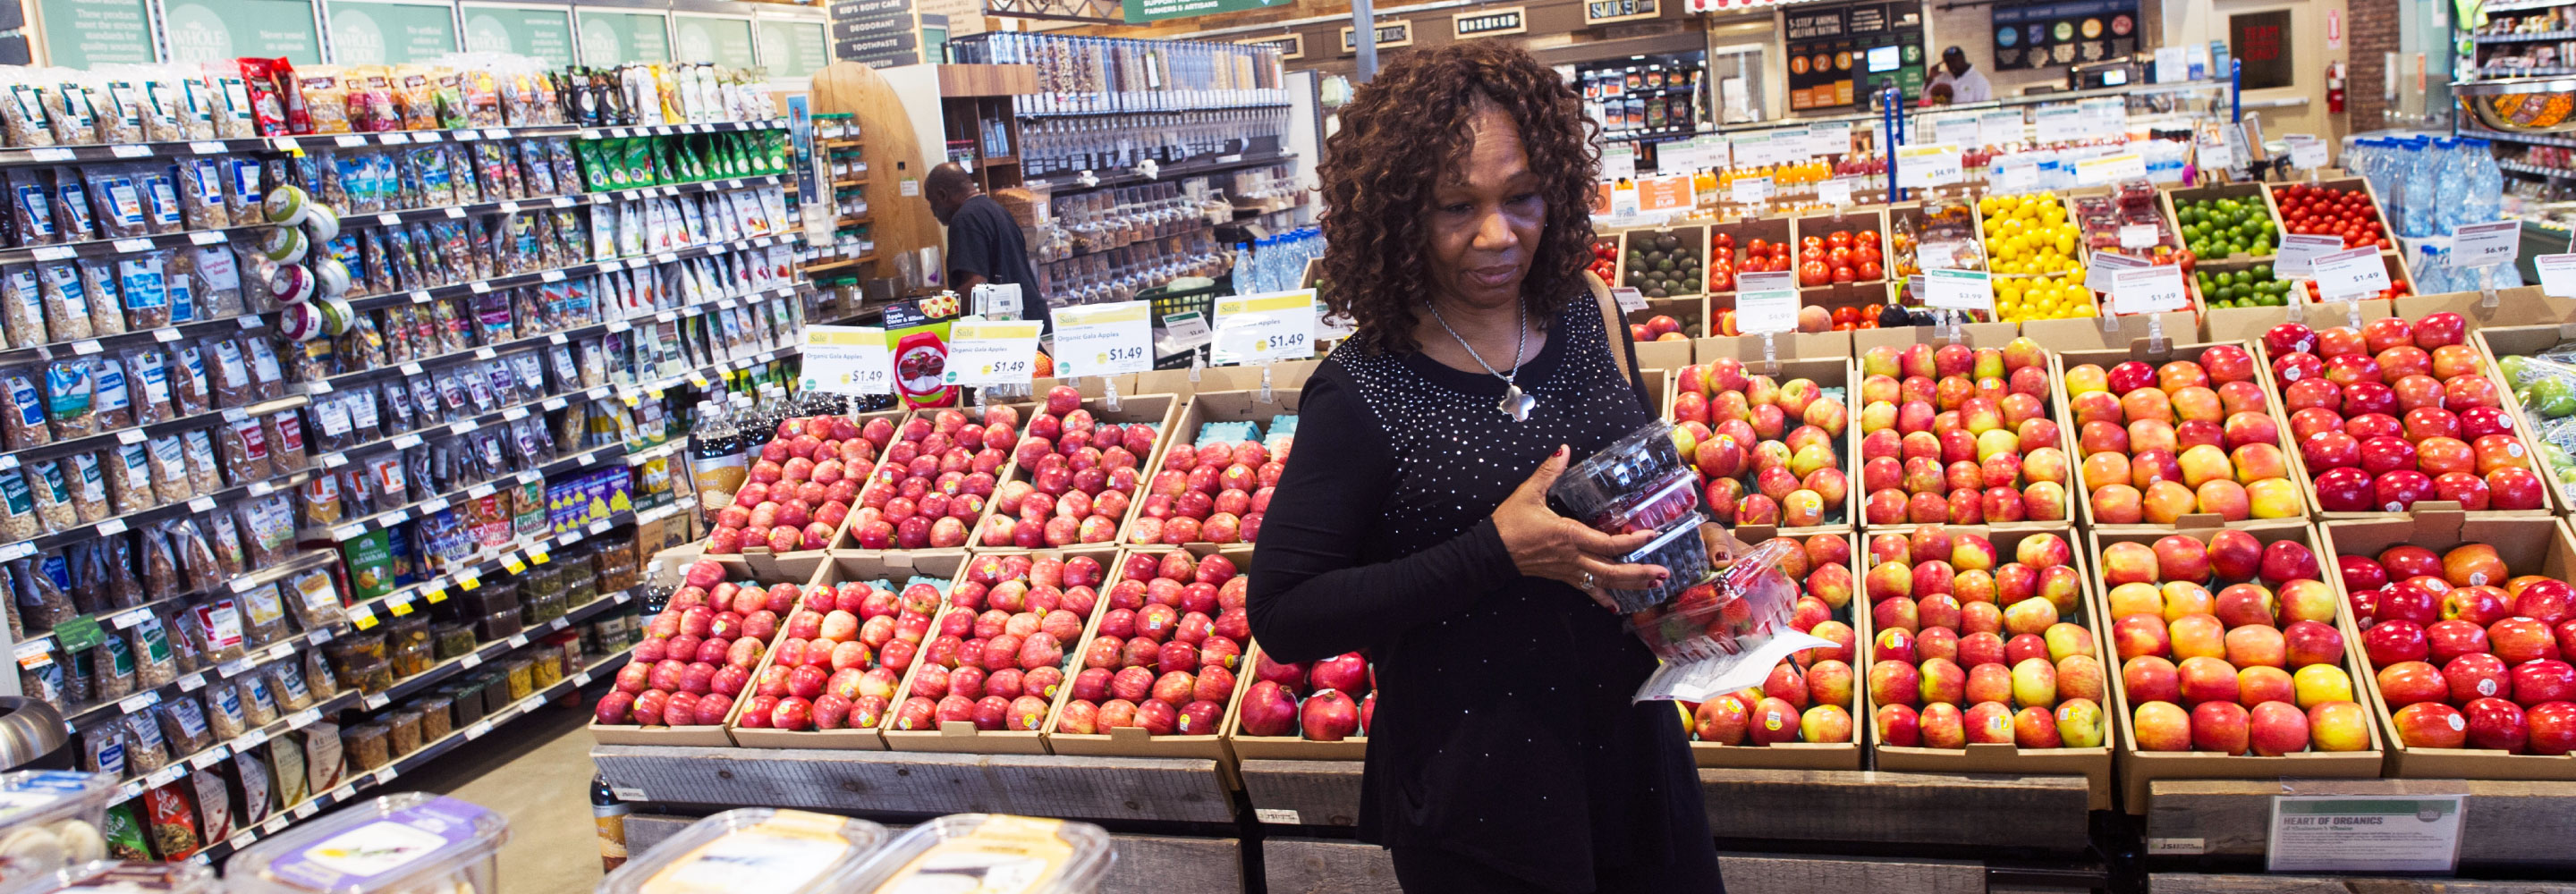 A woman shopping for produce in a grocery store.